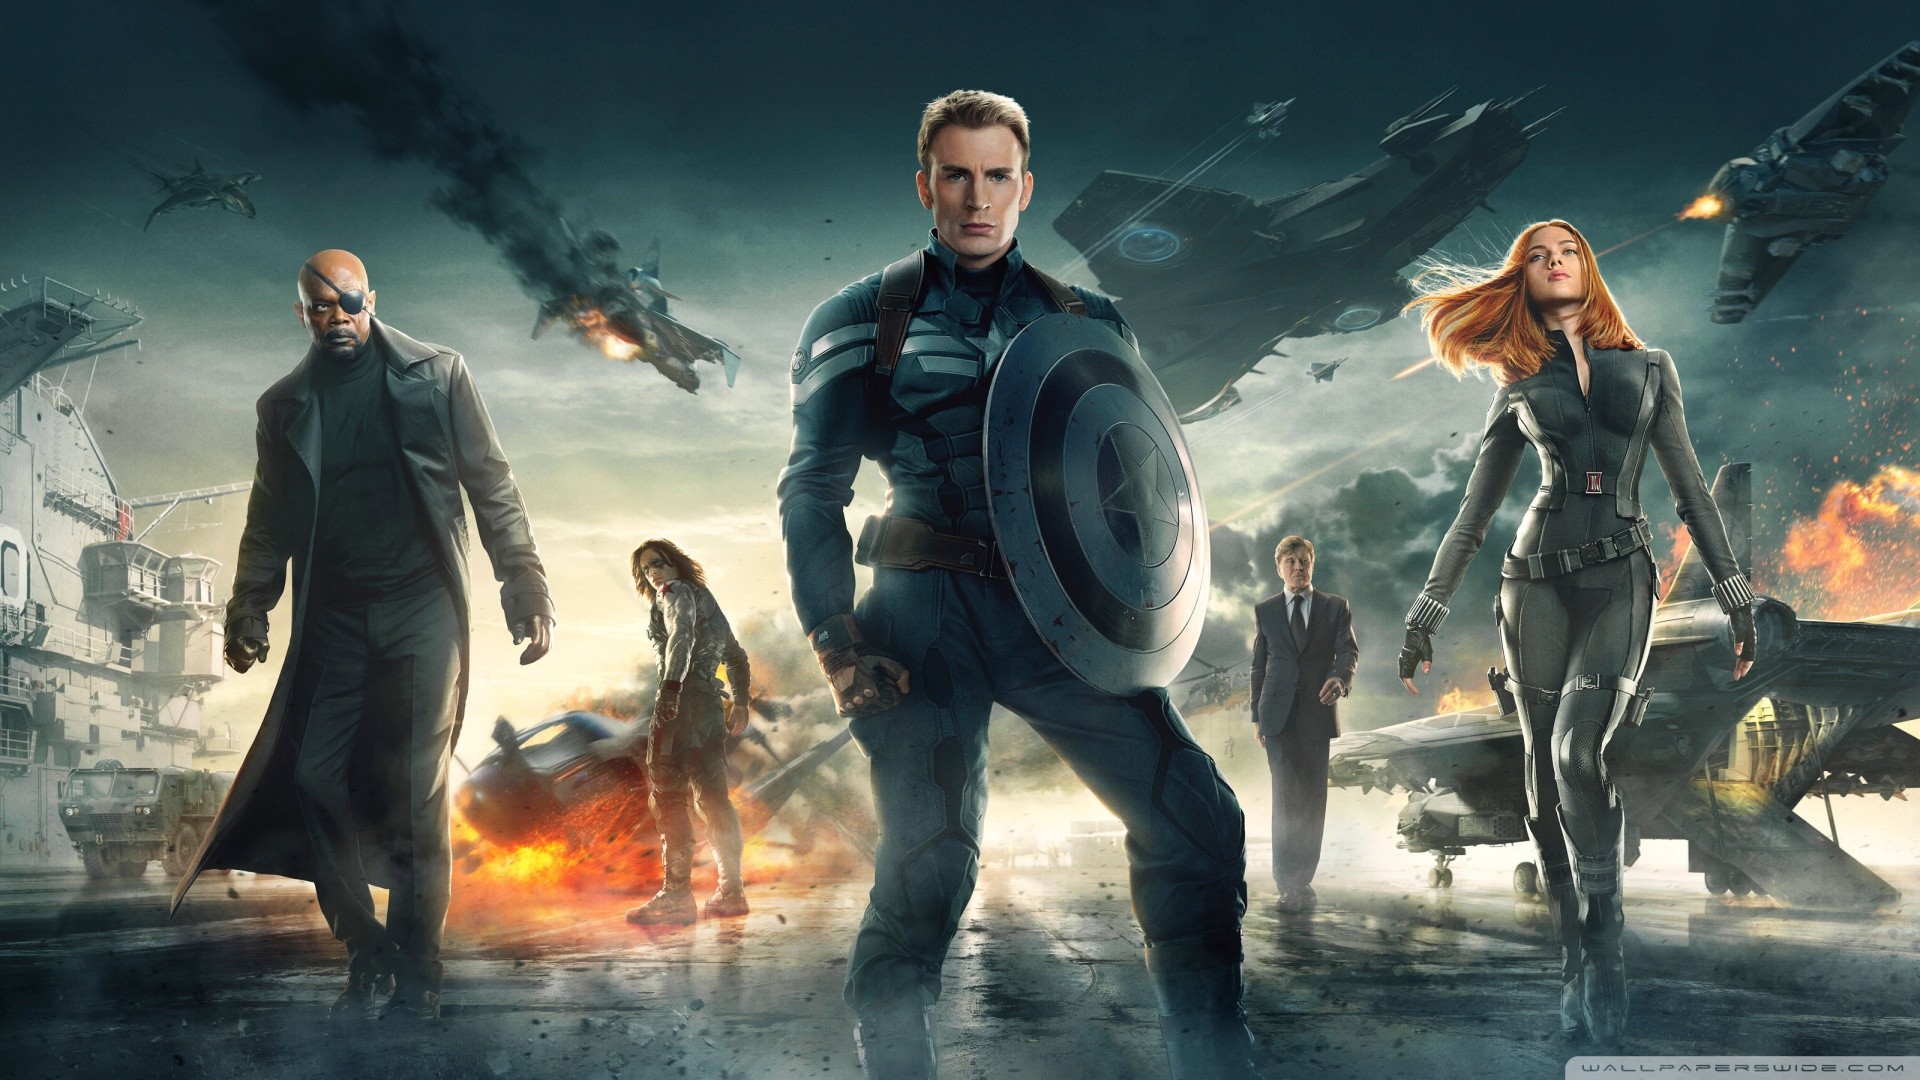 1920x1080 captain_america_the_winter_soldier_2014_movie-wallpaper- -by-3DMOVIES4ARAB